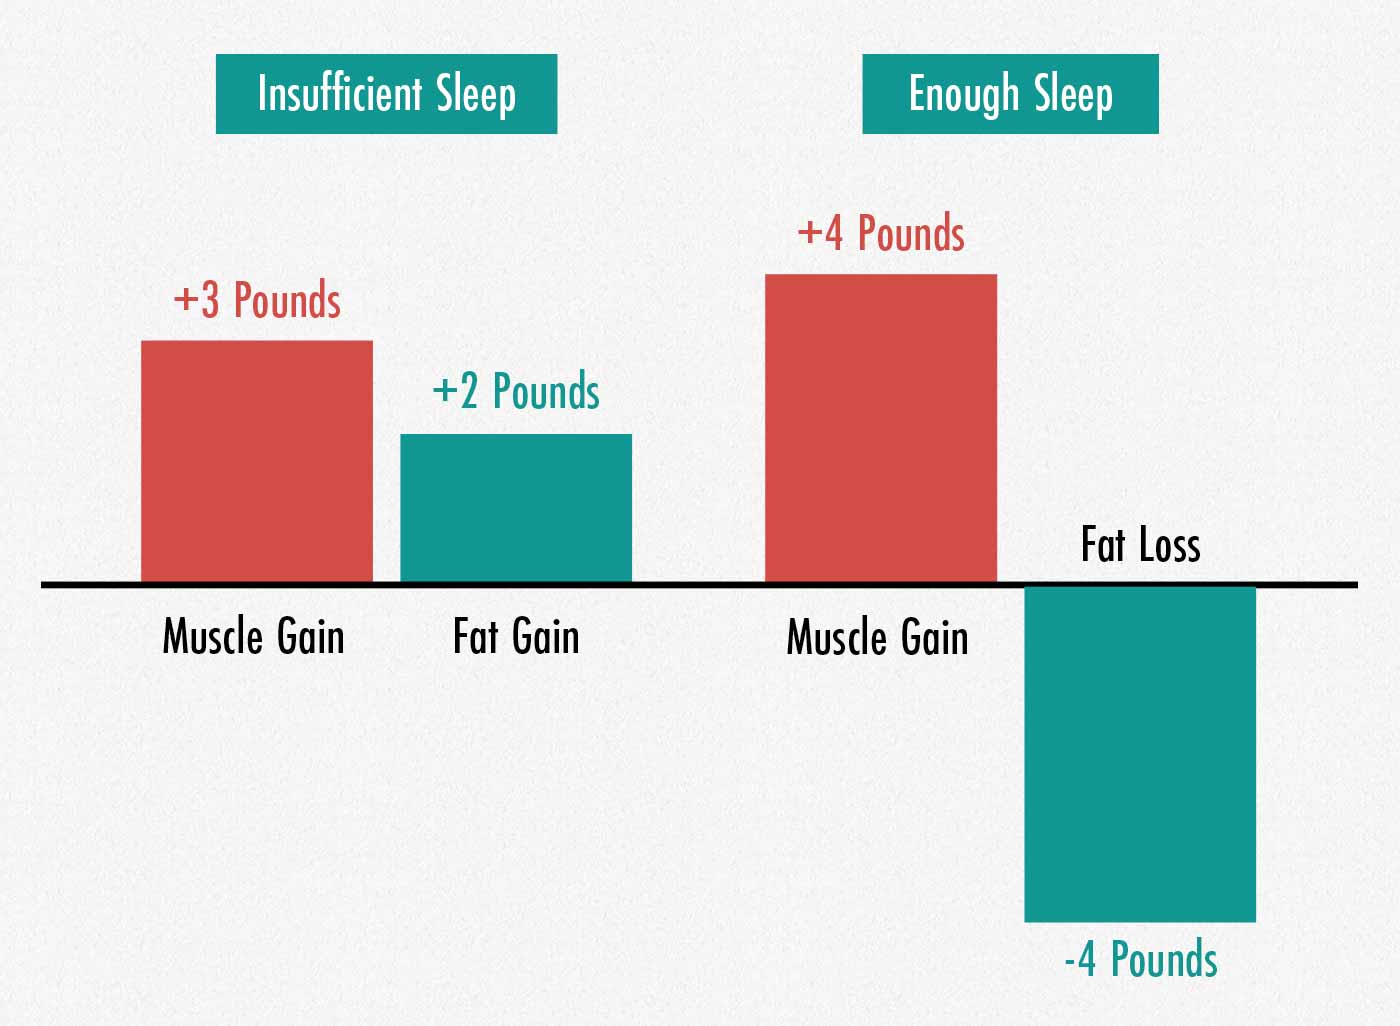 Graph showing that getting enough sleep increases muscle growth and causes fat loss.